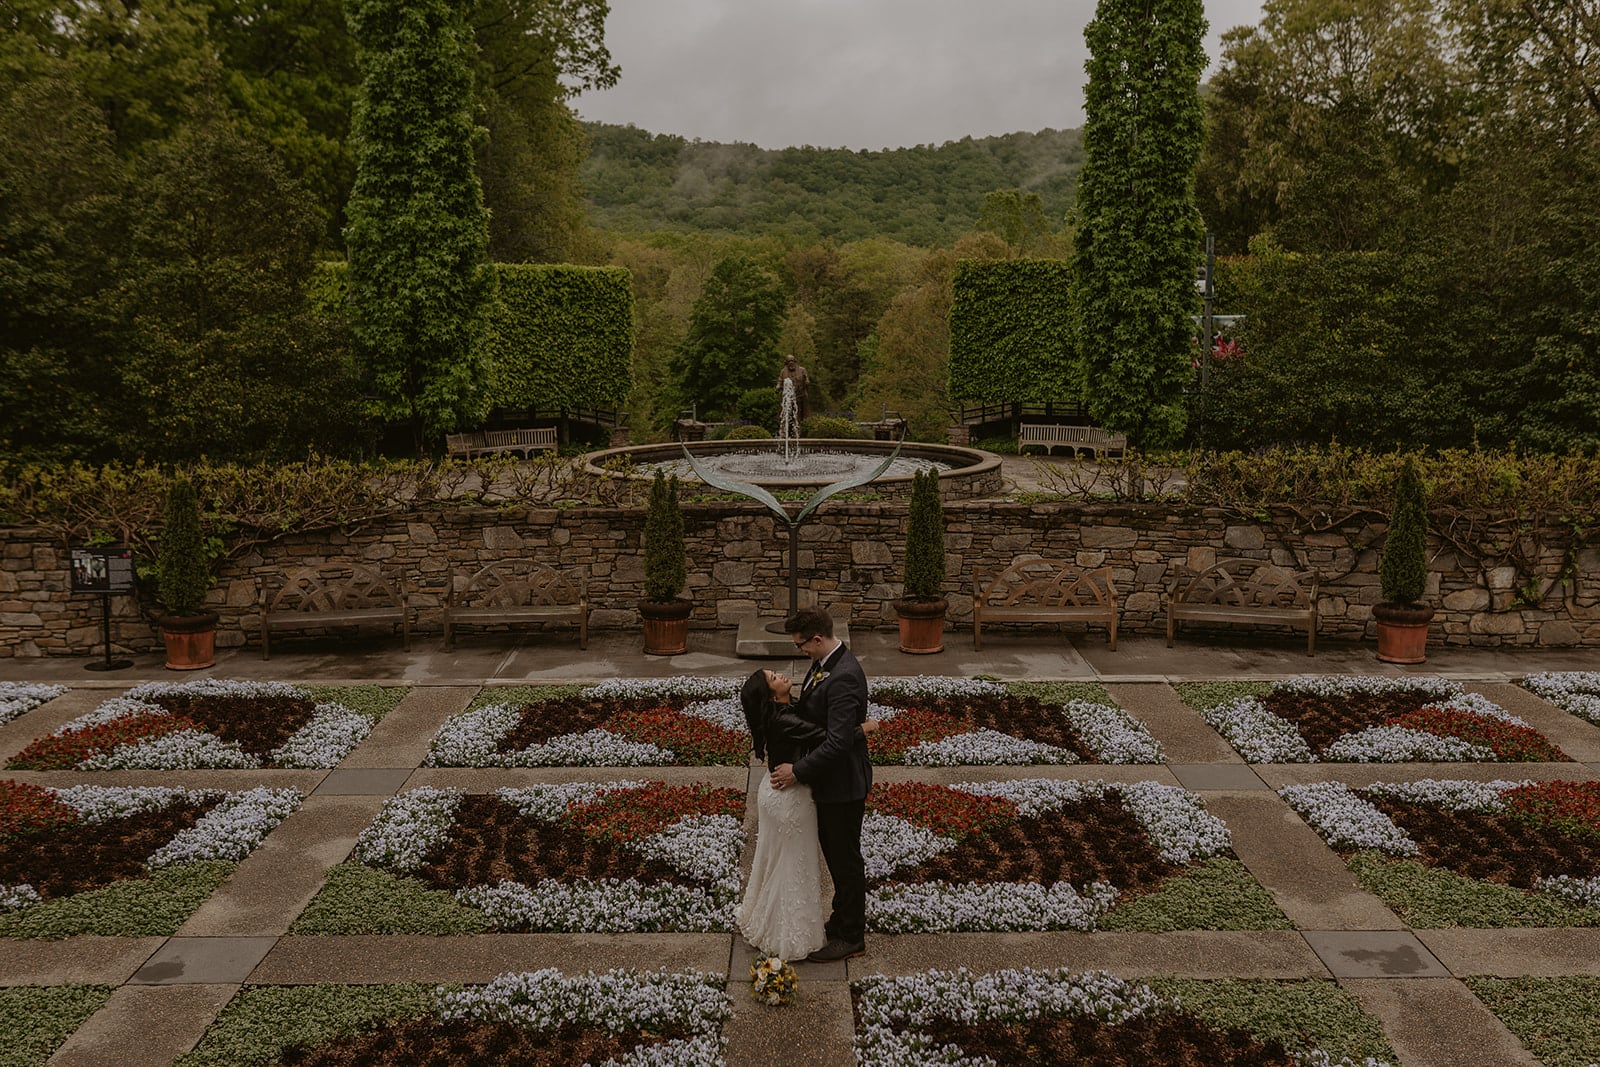 A couple is standing in a blooming field of designed flowers that looks like a quilt. They are in wedding clothes and there is a foggy mountain in the back. They are facing each other smiling with a fountain and square bushes in the background.